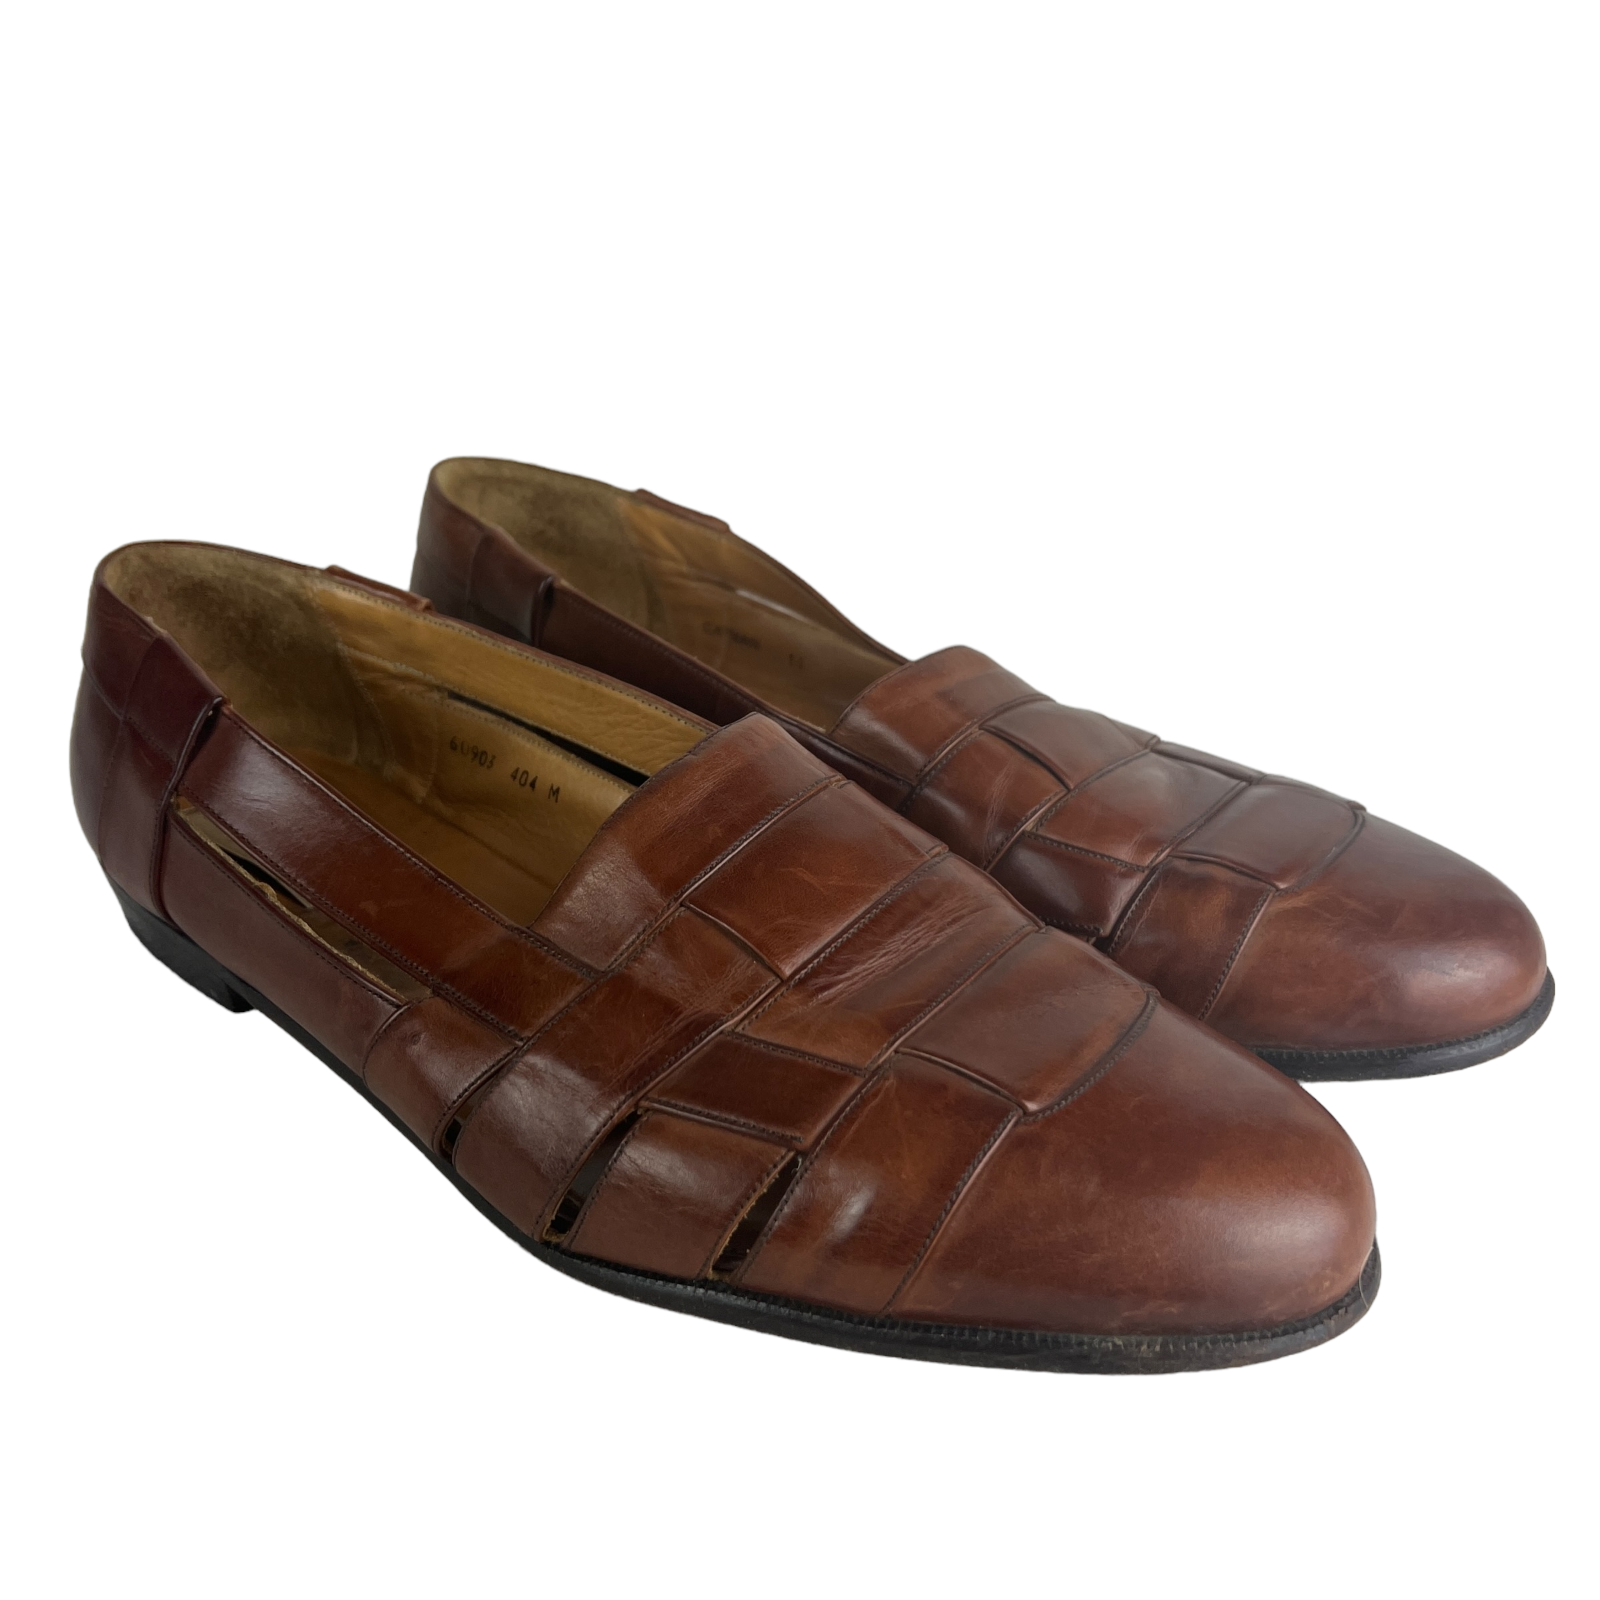 Primary image for Mezlan Cayman Loafers Mens 14 Brown Leather Basket Weave Dress Shoes Spain